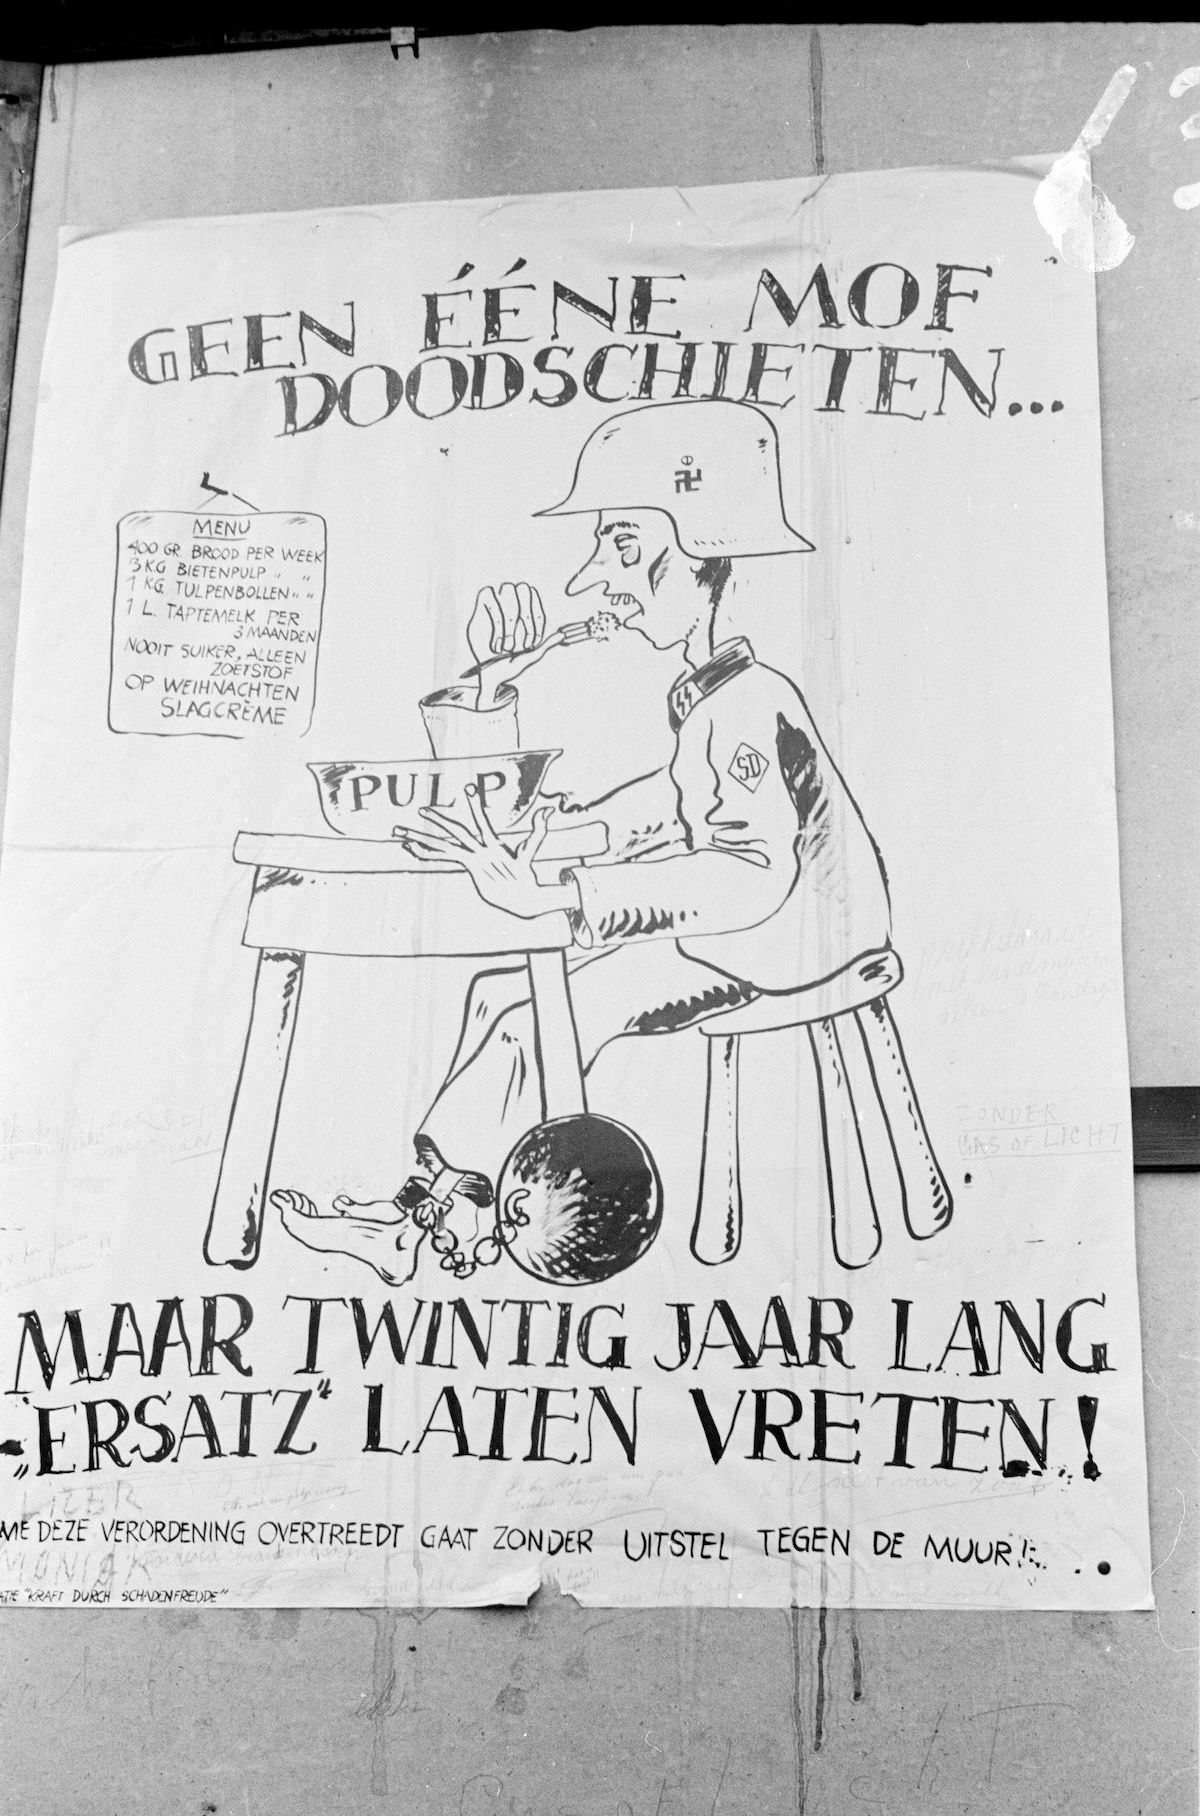 Photo from the Huizinga collection of the NIOD. Cartoon posted on the Buitenhof, against the former German occupier because of hunger during the occupation.